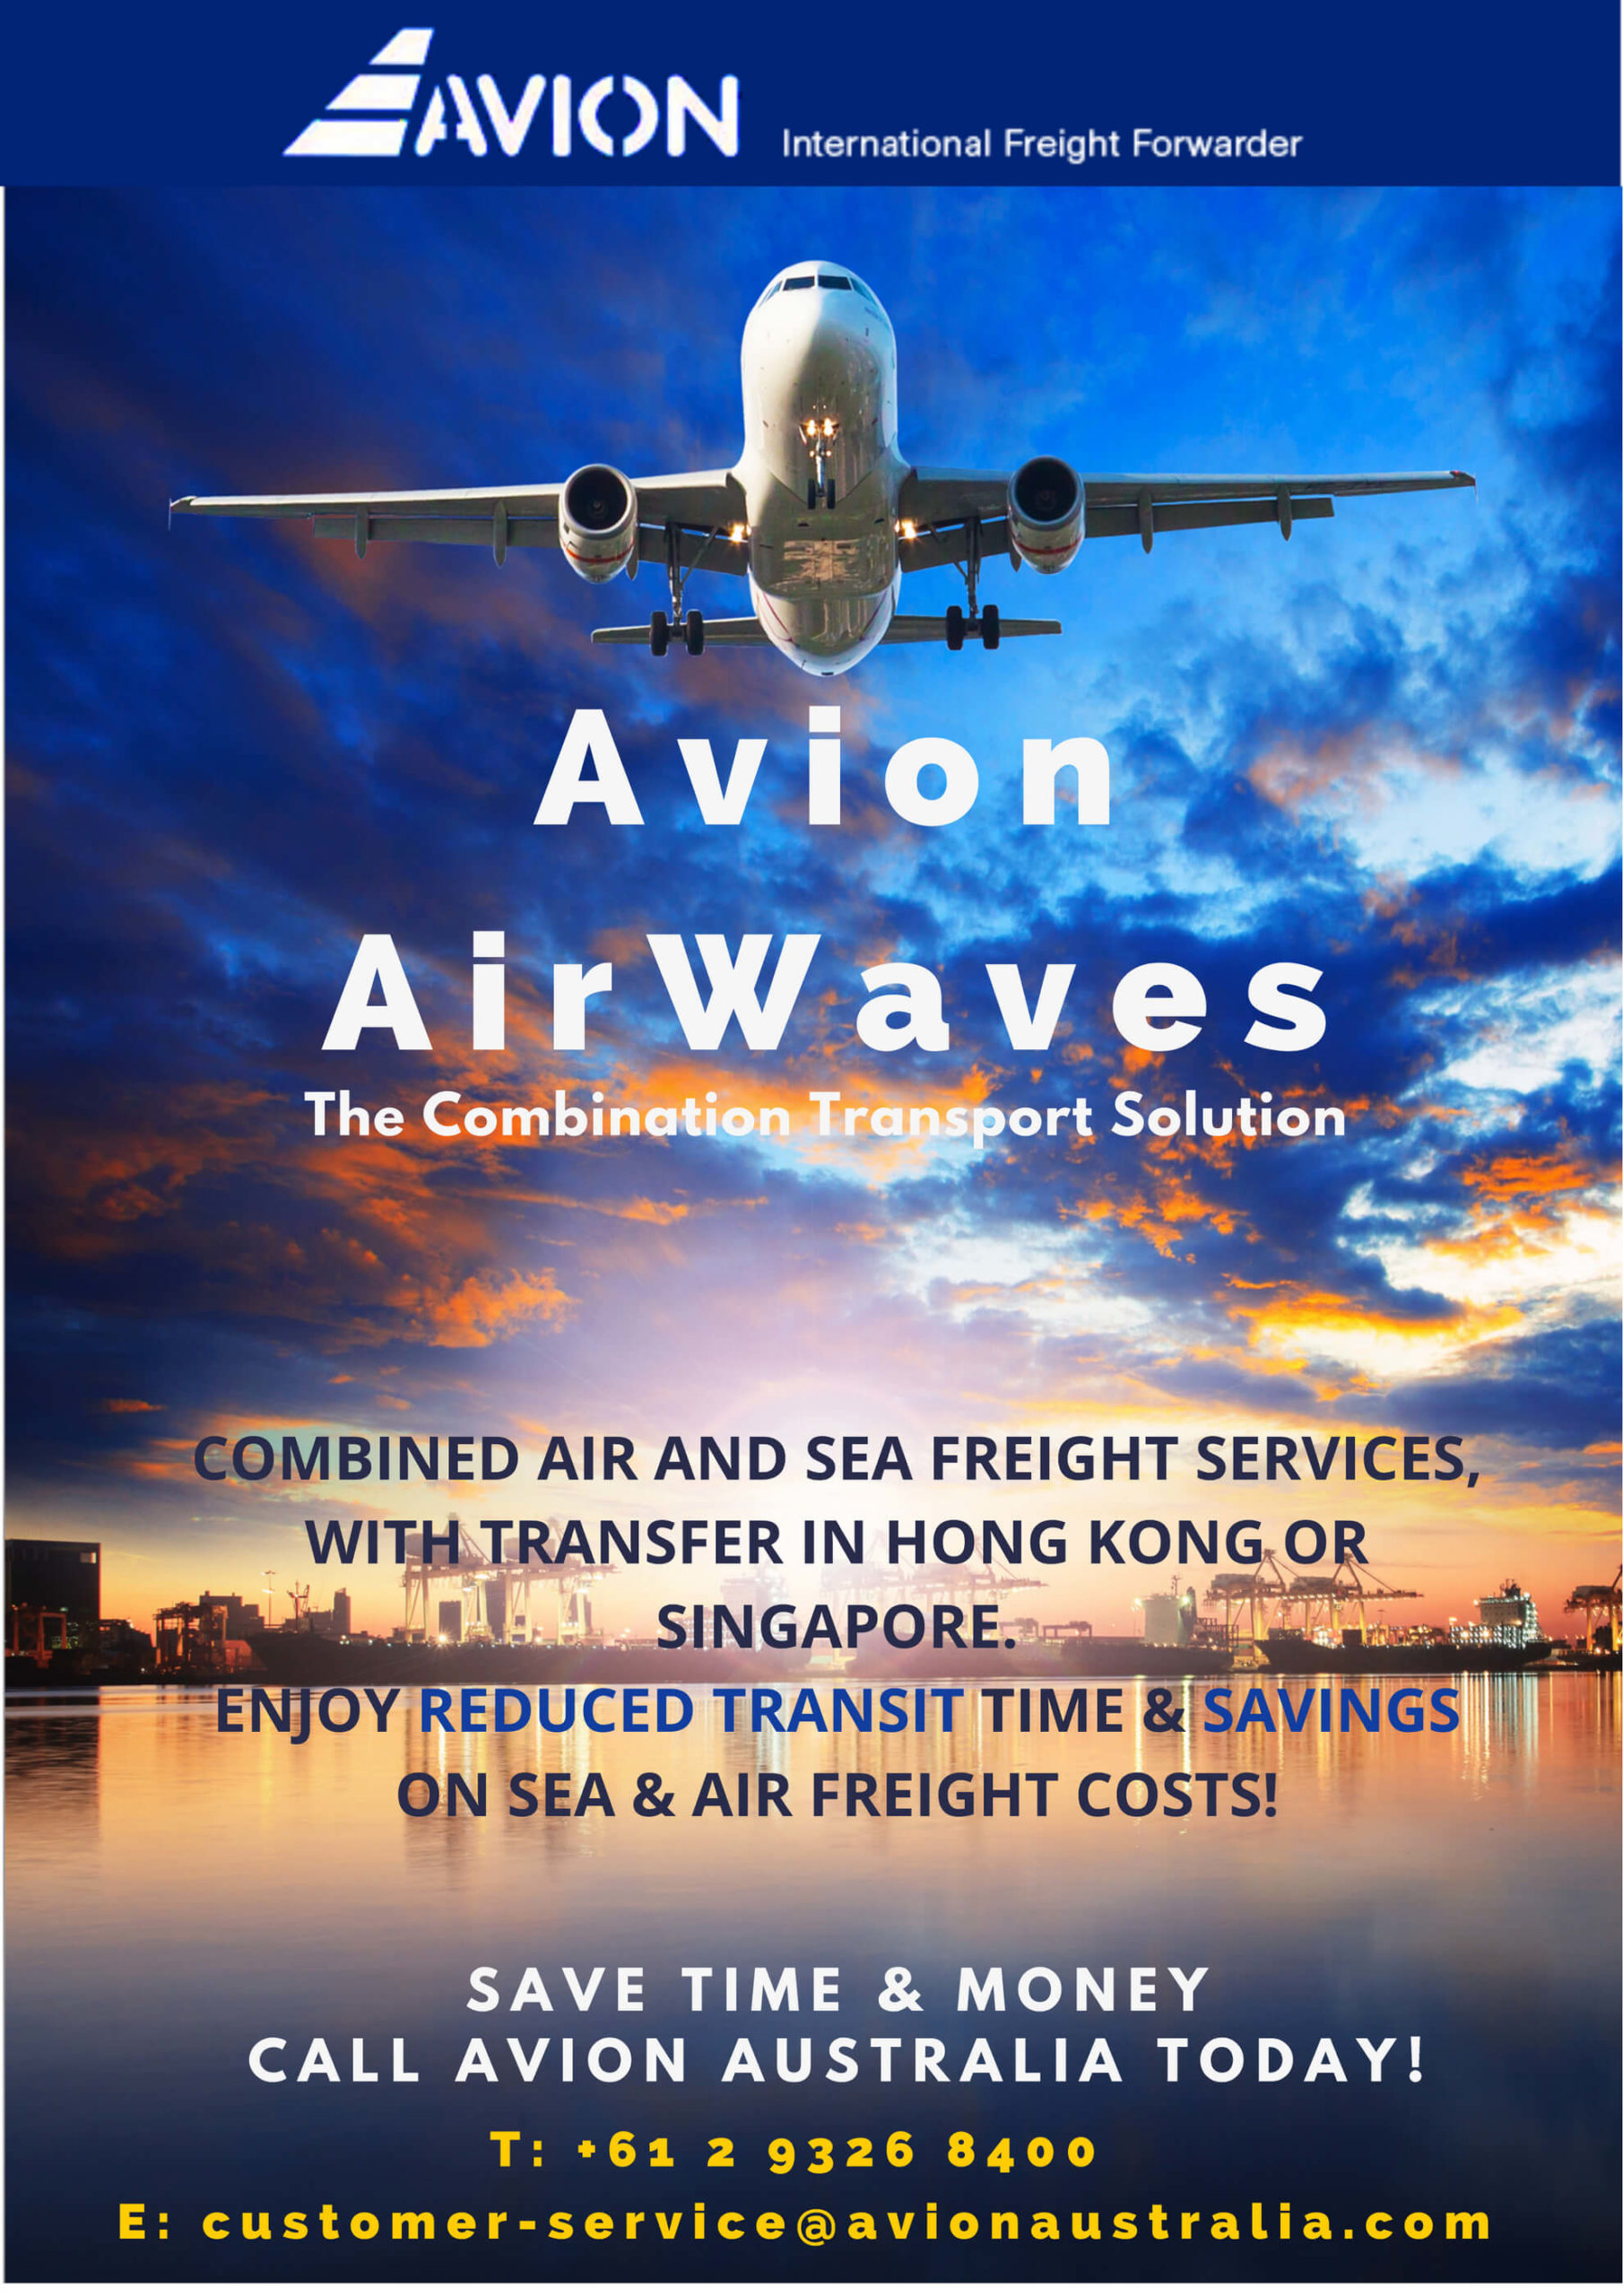 Avion AirWaves-The Transport Solution That Saves You Time and Money.